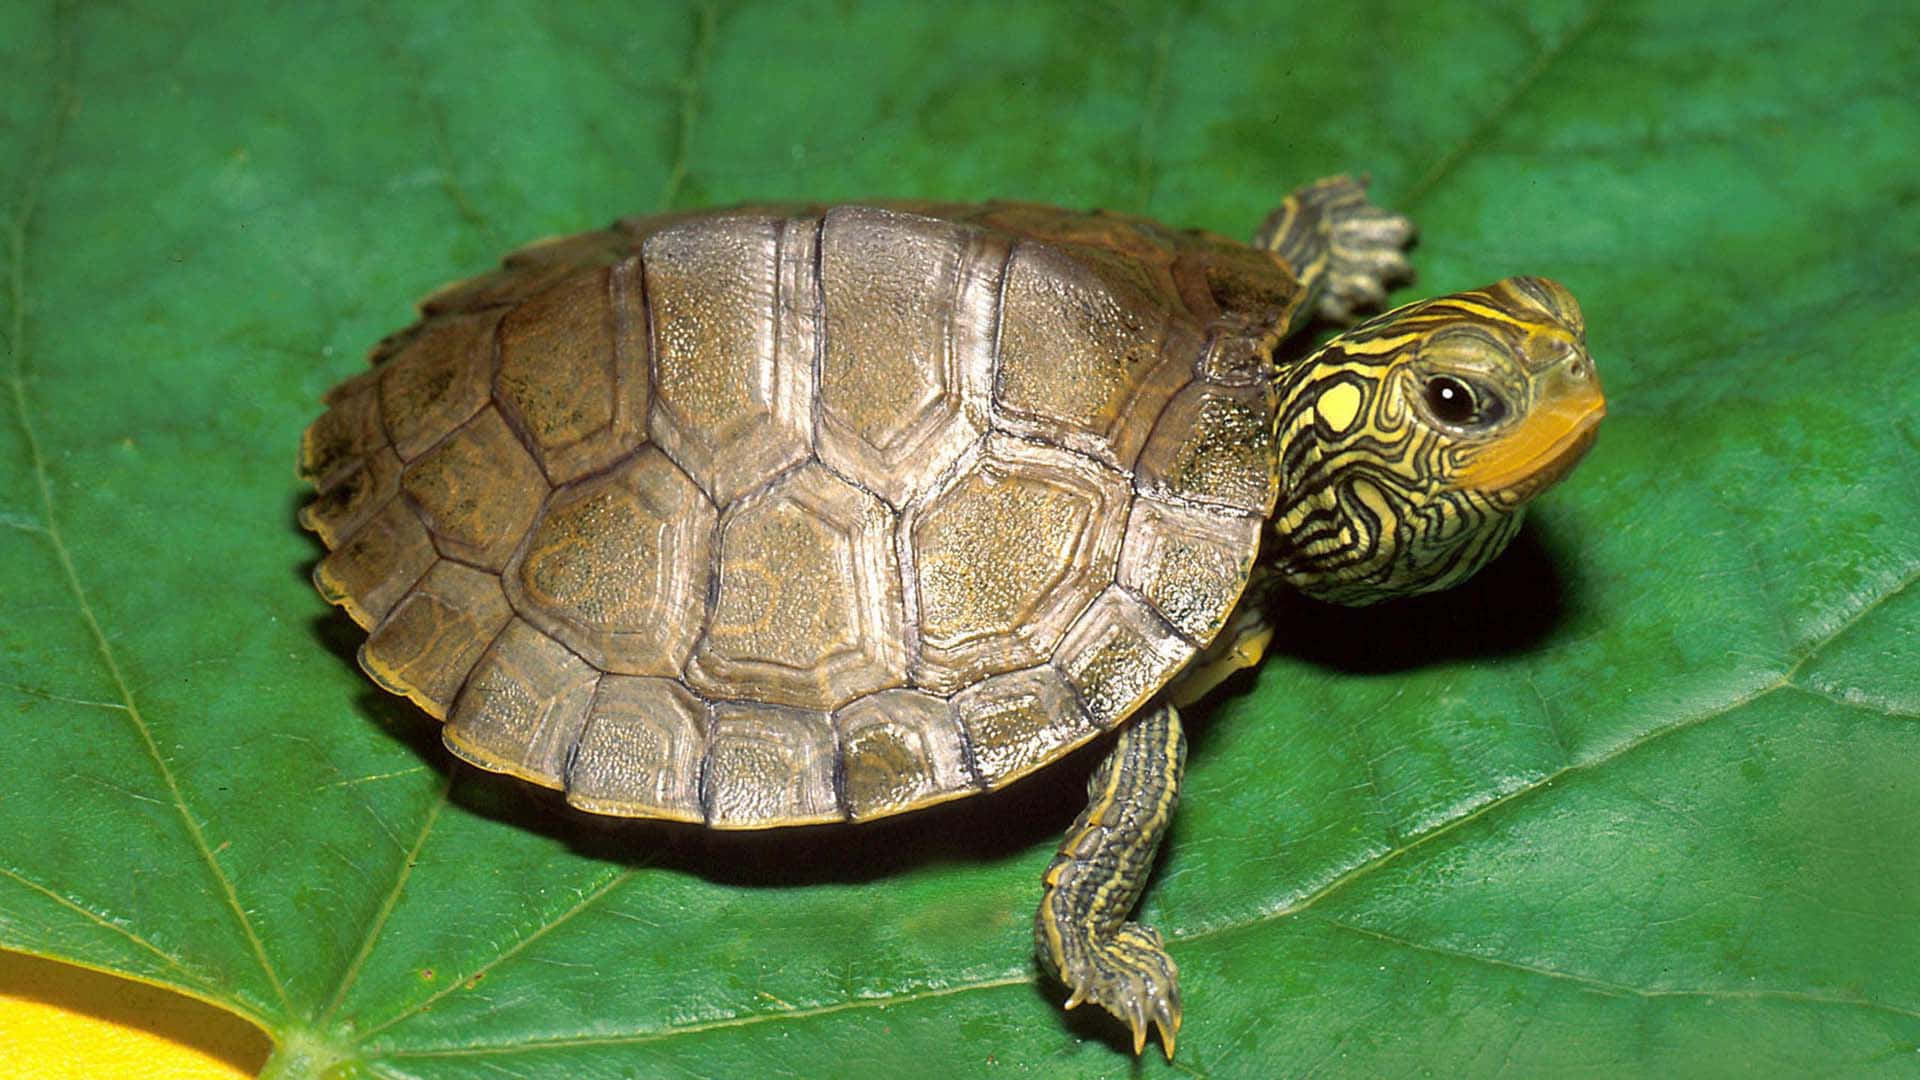 Explore the World With This Cute Turtle!